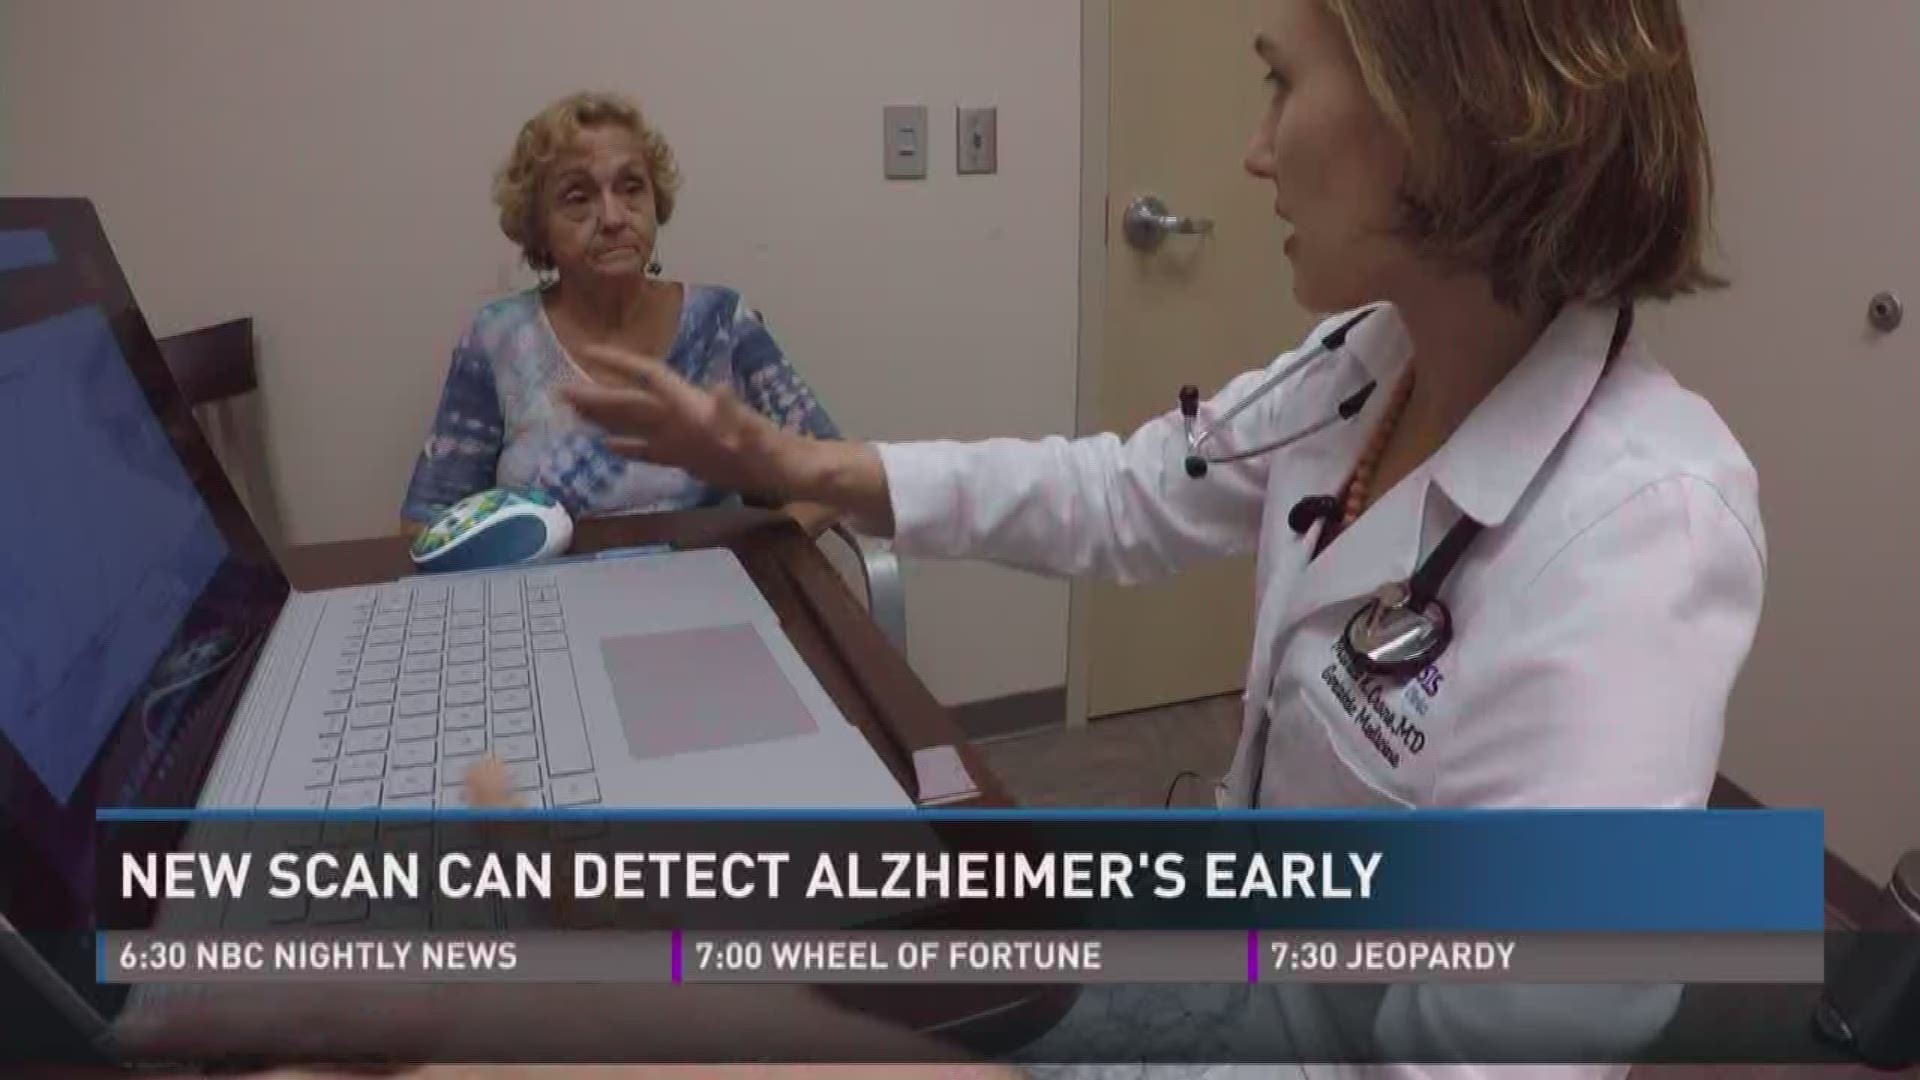 July 26, 2017: Modern medicine is helping doctors get in front of Alzheimer's disease. Doctors can actually see signs of Alzheimer's through special PET scans years before severe symptoms show up.